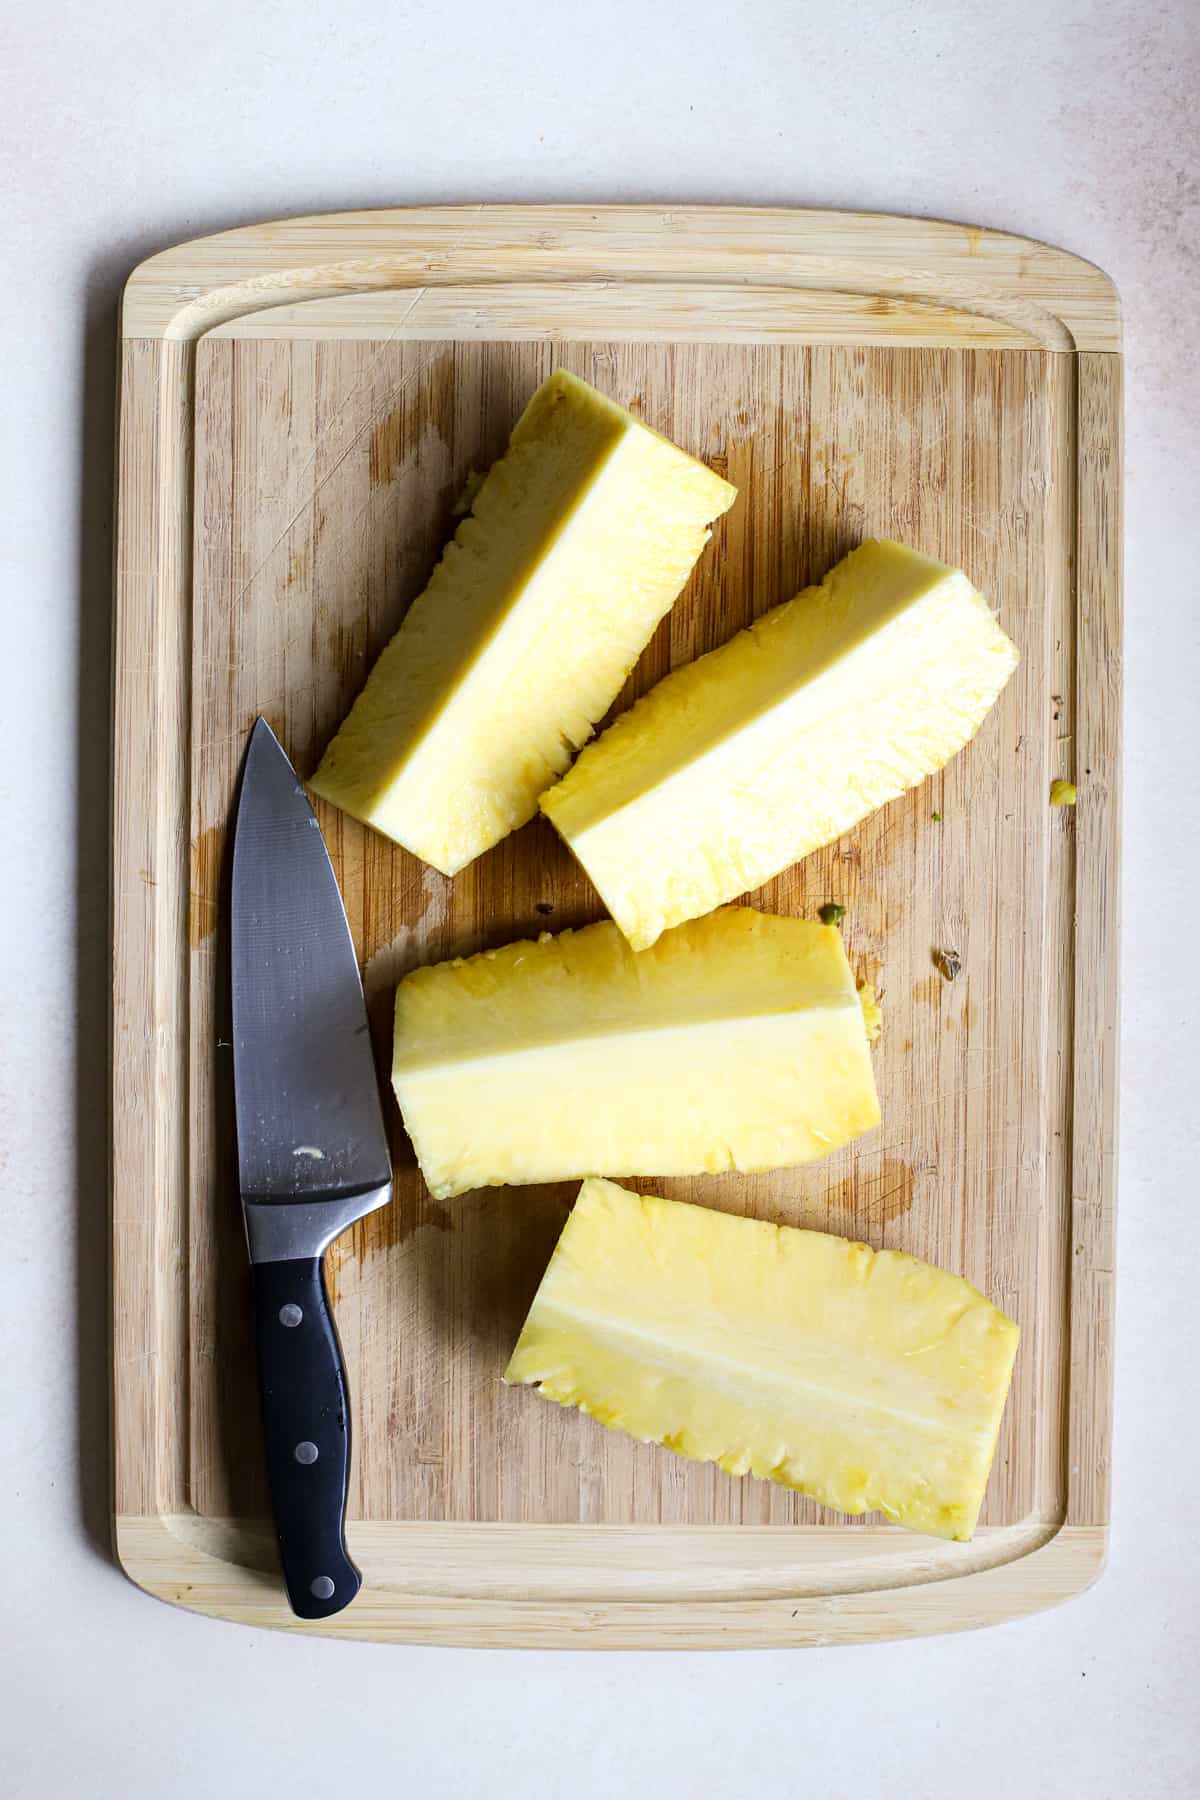 Whole pineapple cut into quarter lengthwise, next to chef's knife on bamboo cutting board